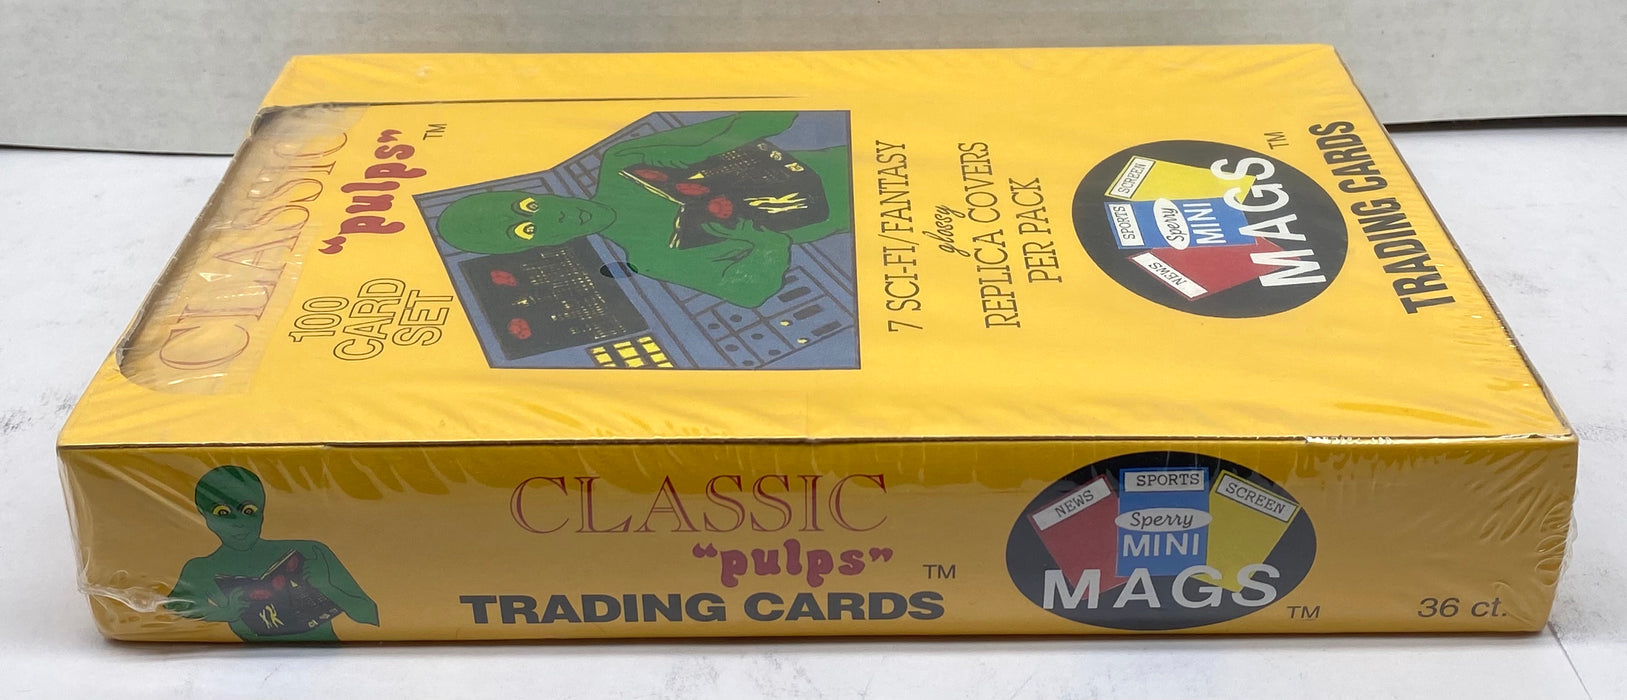 1992 Classic "Pulps" Pulp Magazine Covers Trading Card Box 36 Packs Topps U.K.   - TvMovieCards.com